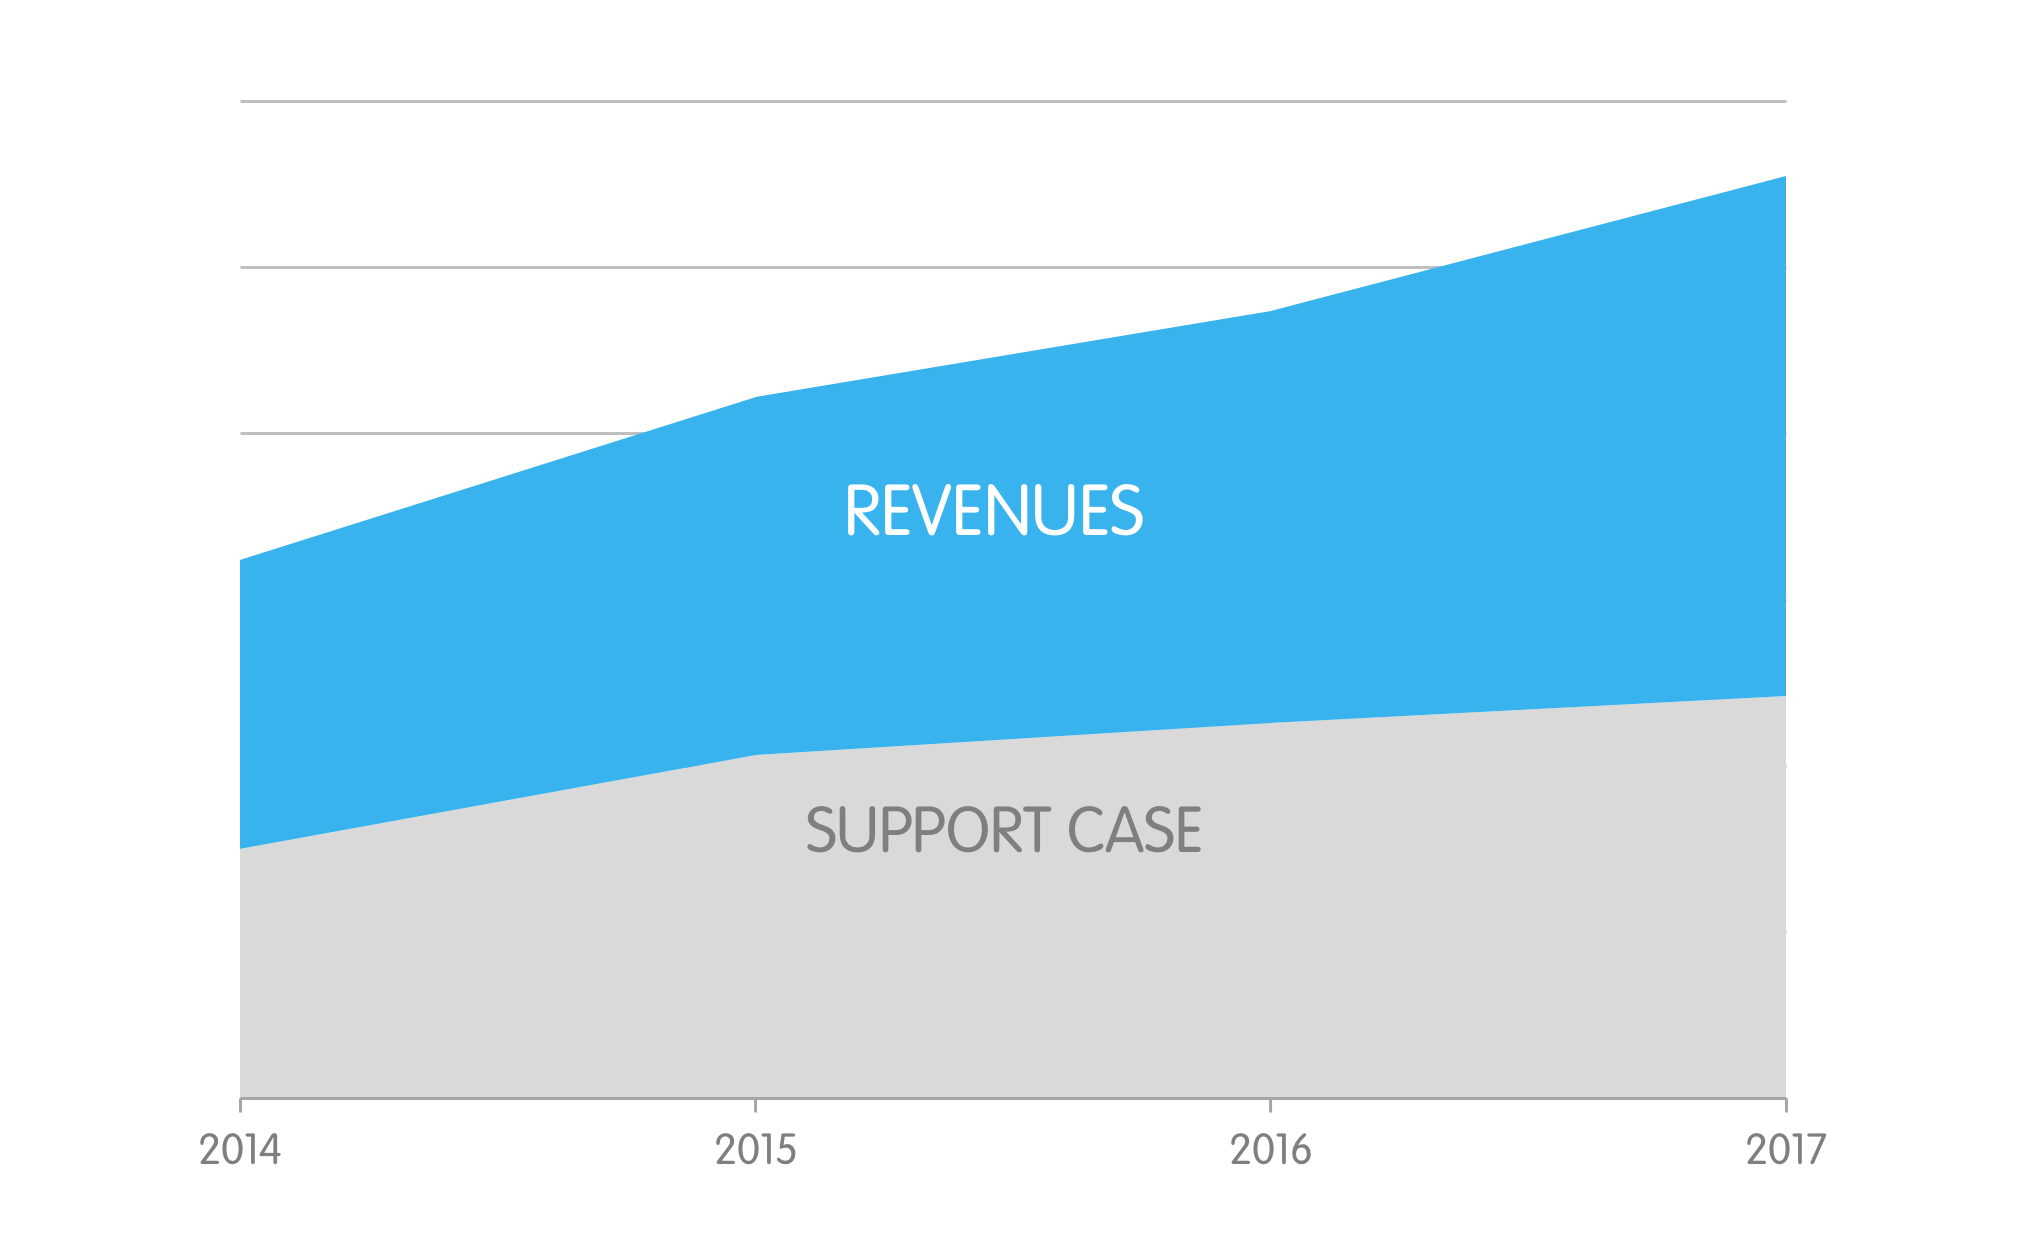 While YOY turnover increase, support cases have almost zero growth.